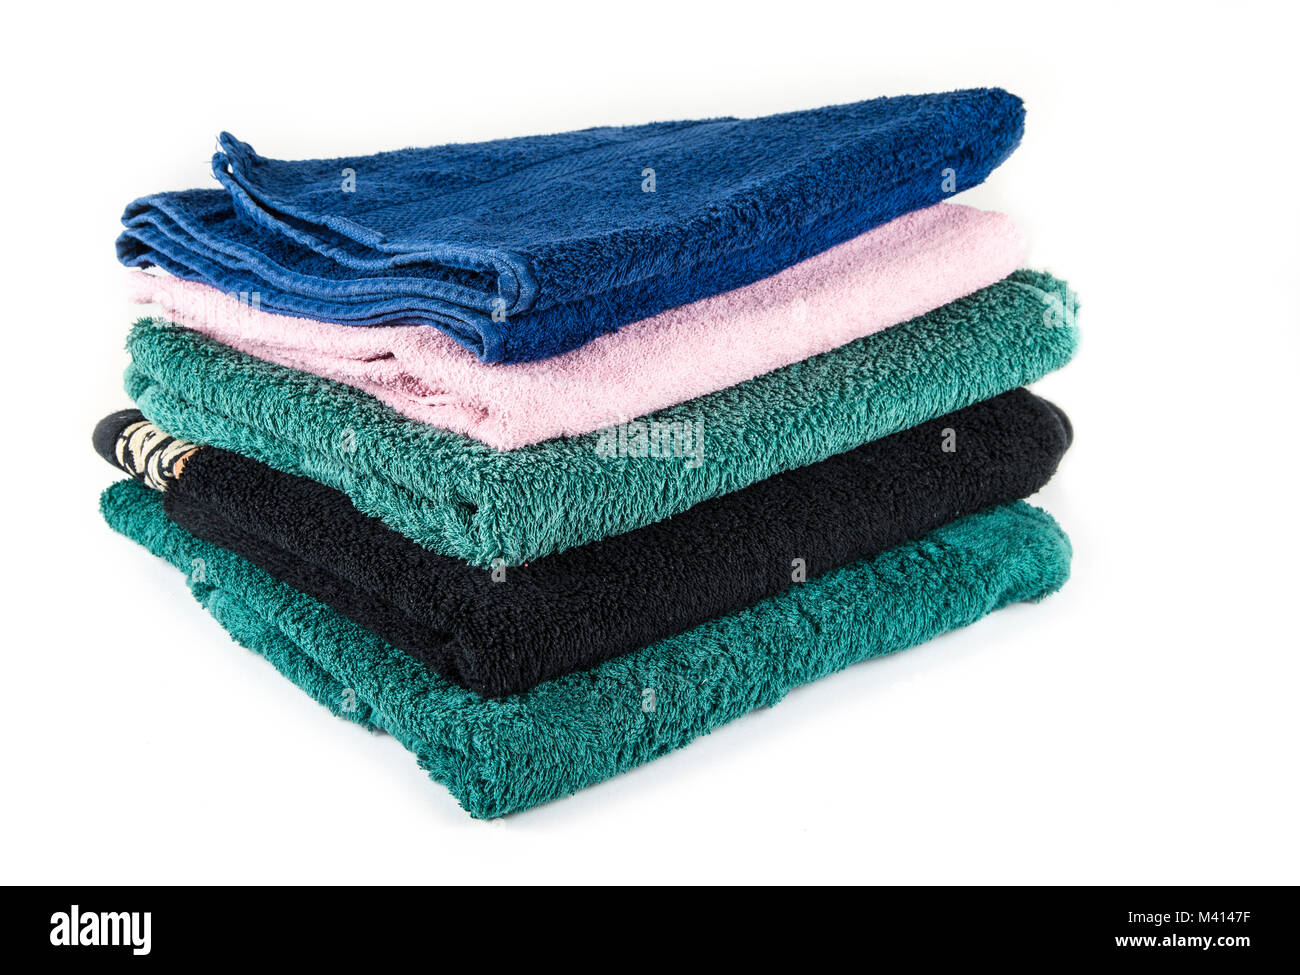 Medium towels for the bathroom and bath. Bath towels are stacked. Stock Photo